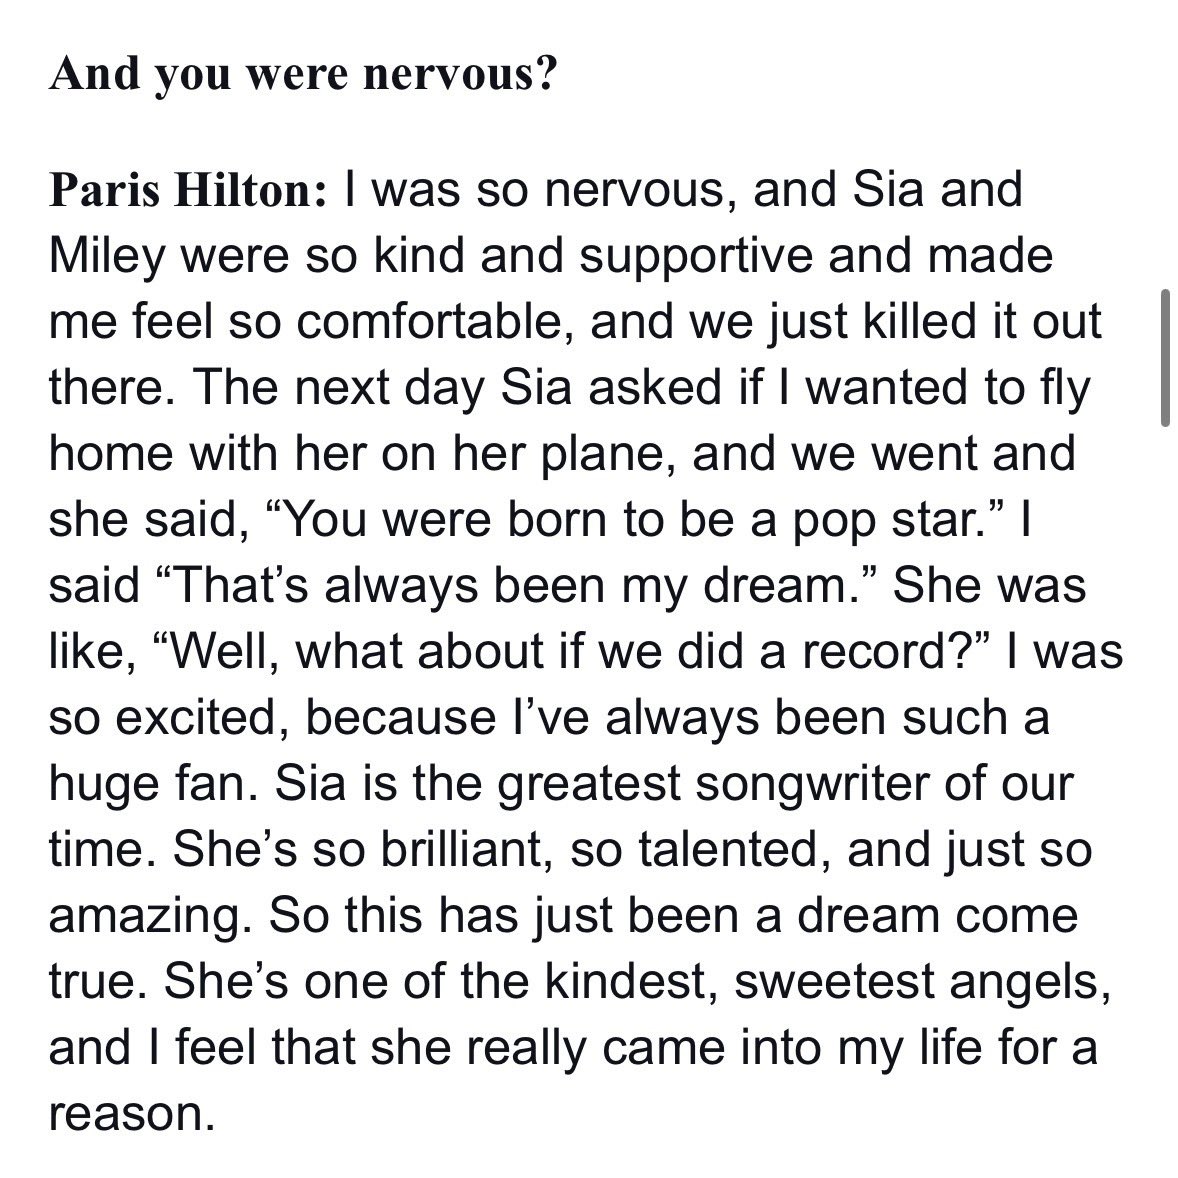 📰 | @ParisHilton to @billboard on @Sia: “Sia is the greatest songwriter of our generation. She‘s so brilliant, so talented and just so amazing. So this (working with her) has just been a dream come true. (…) and I feel that she really came in my life for a reason“